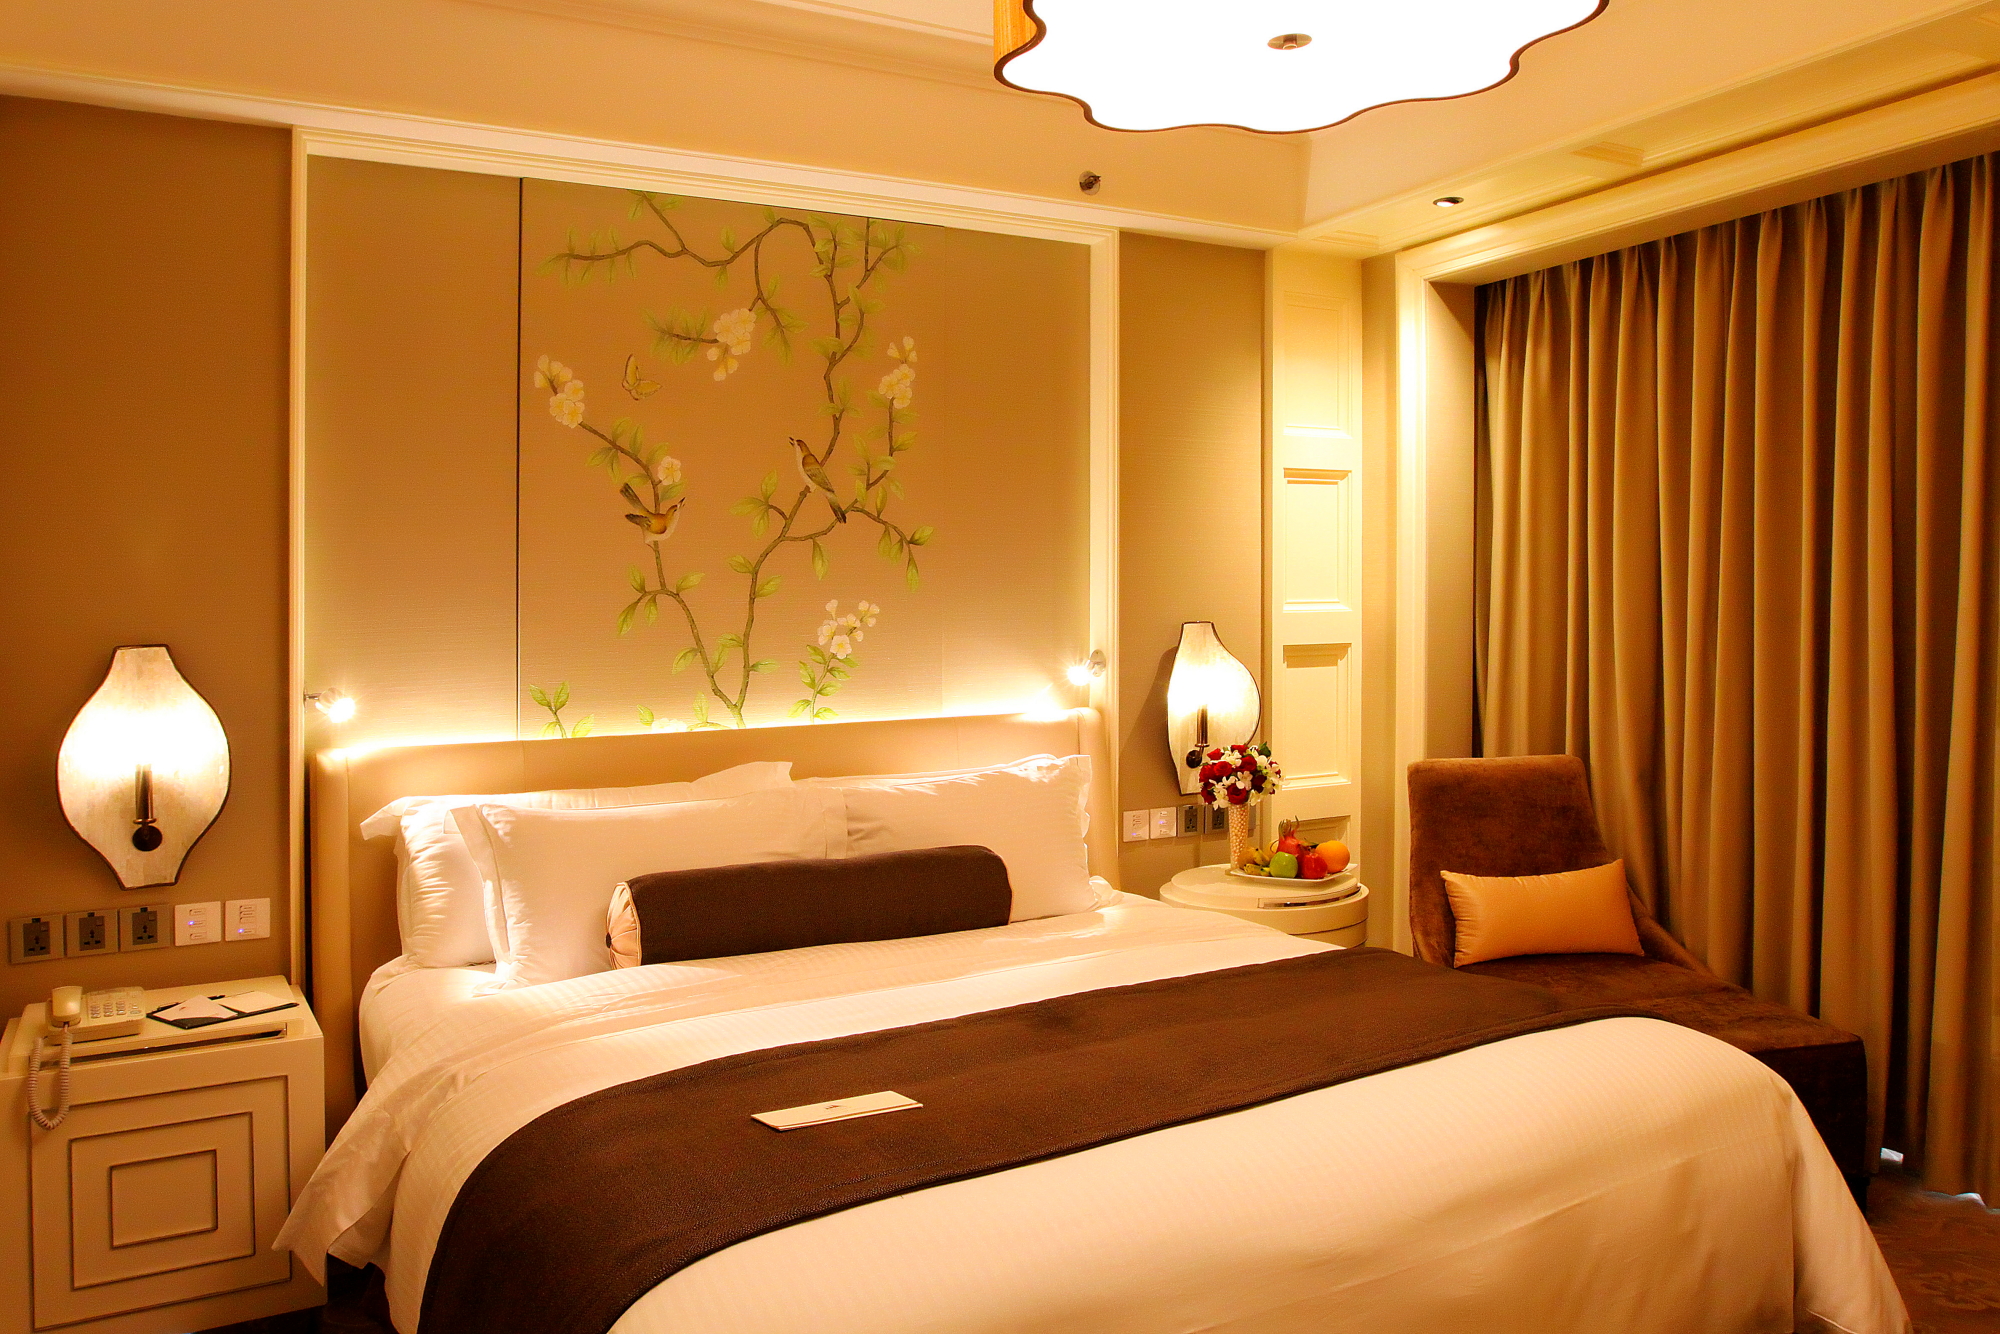 The Caravelle Saigon, a Worldhotels’ affiliate hotel, has commenced a major renovation of its guestrooms. Click to enlarge.